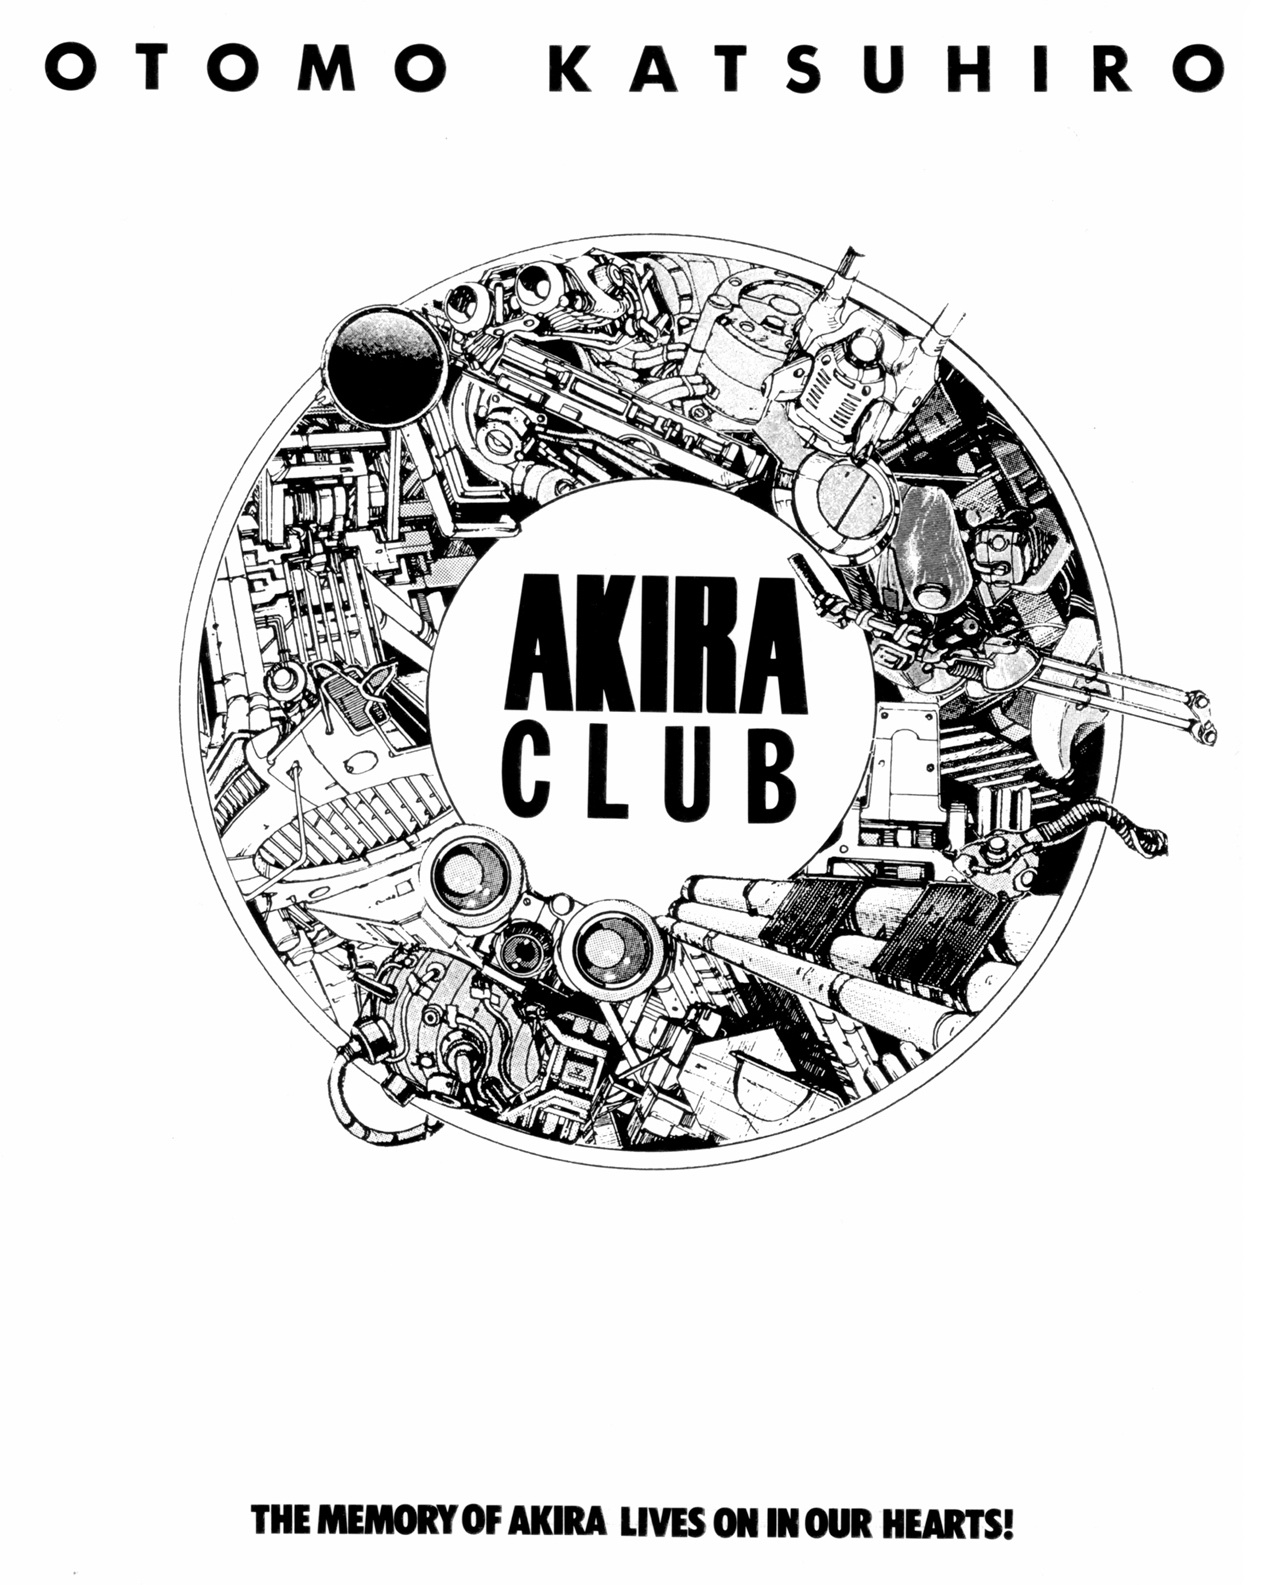 Akira club - The memory of Akira lives on in our hearts! 4